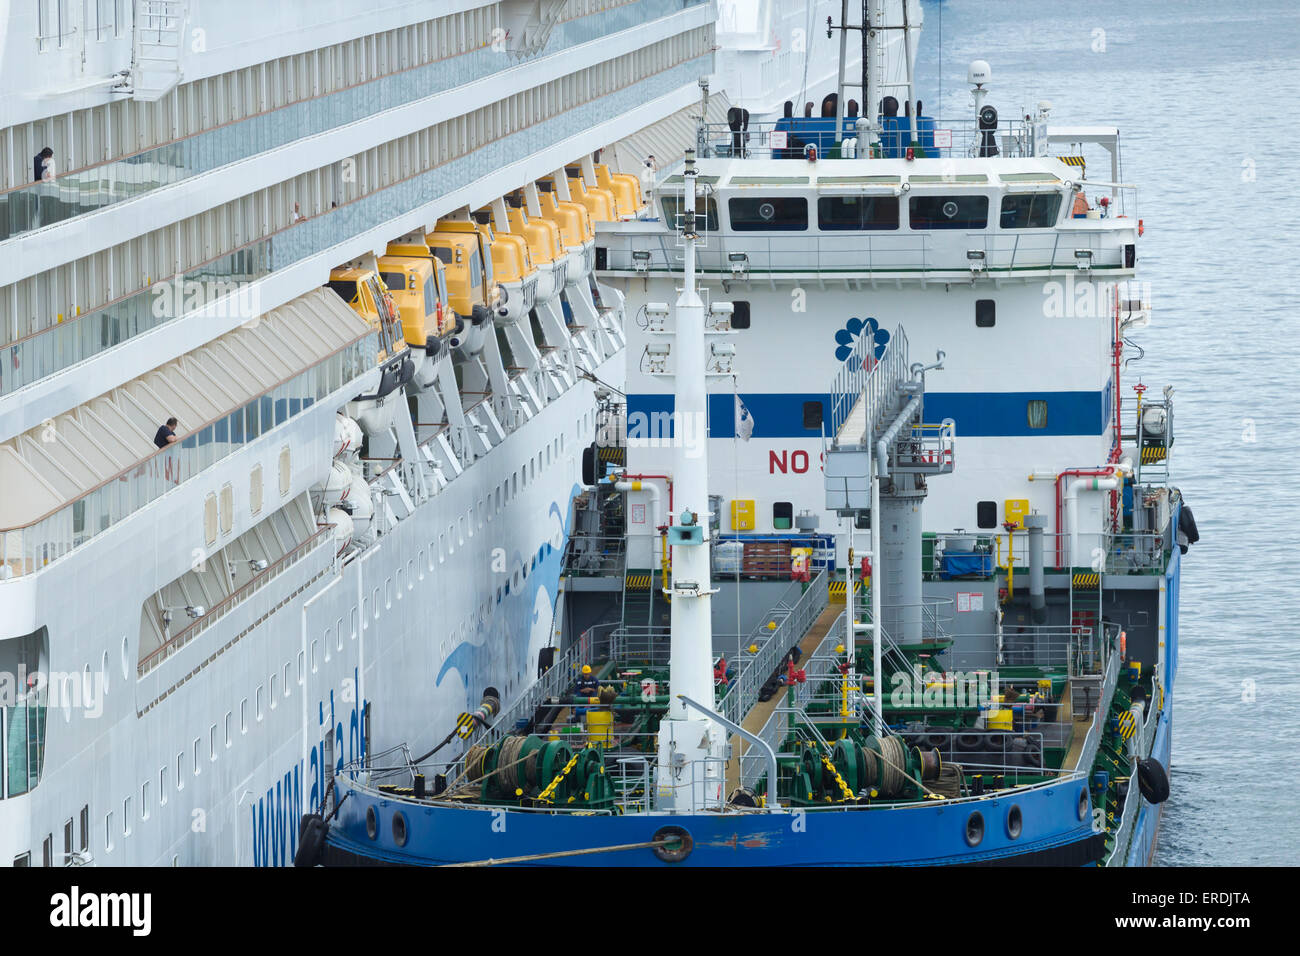 Cruise ship refuelling in port Stock Photo